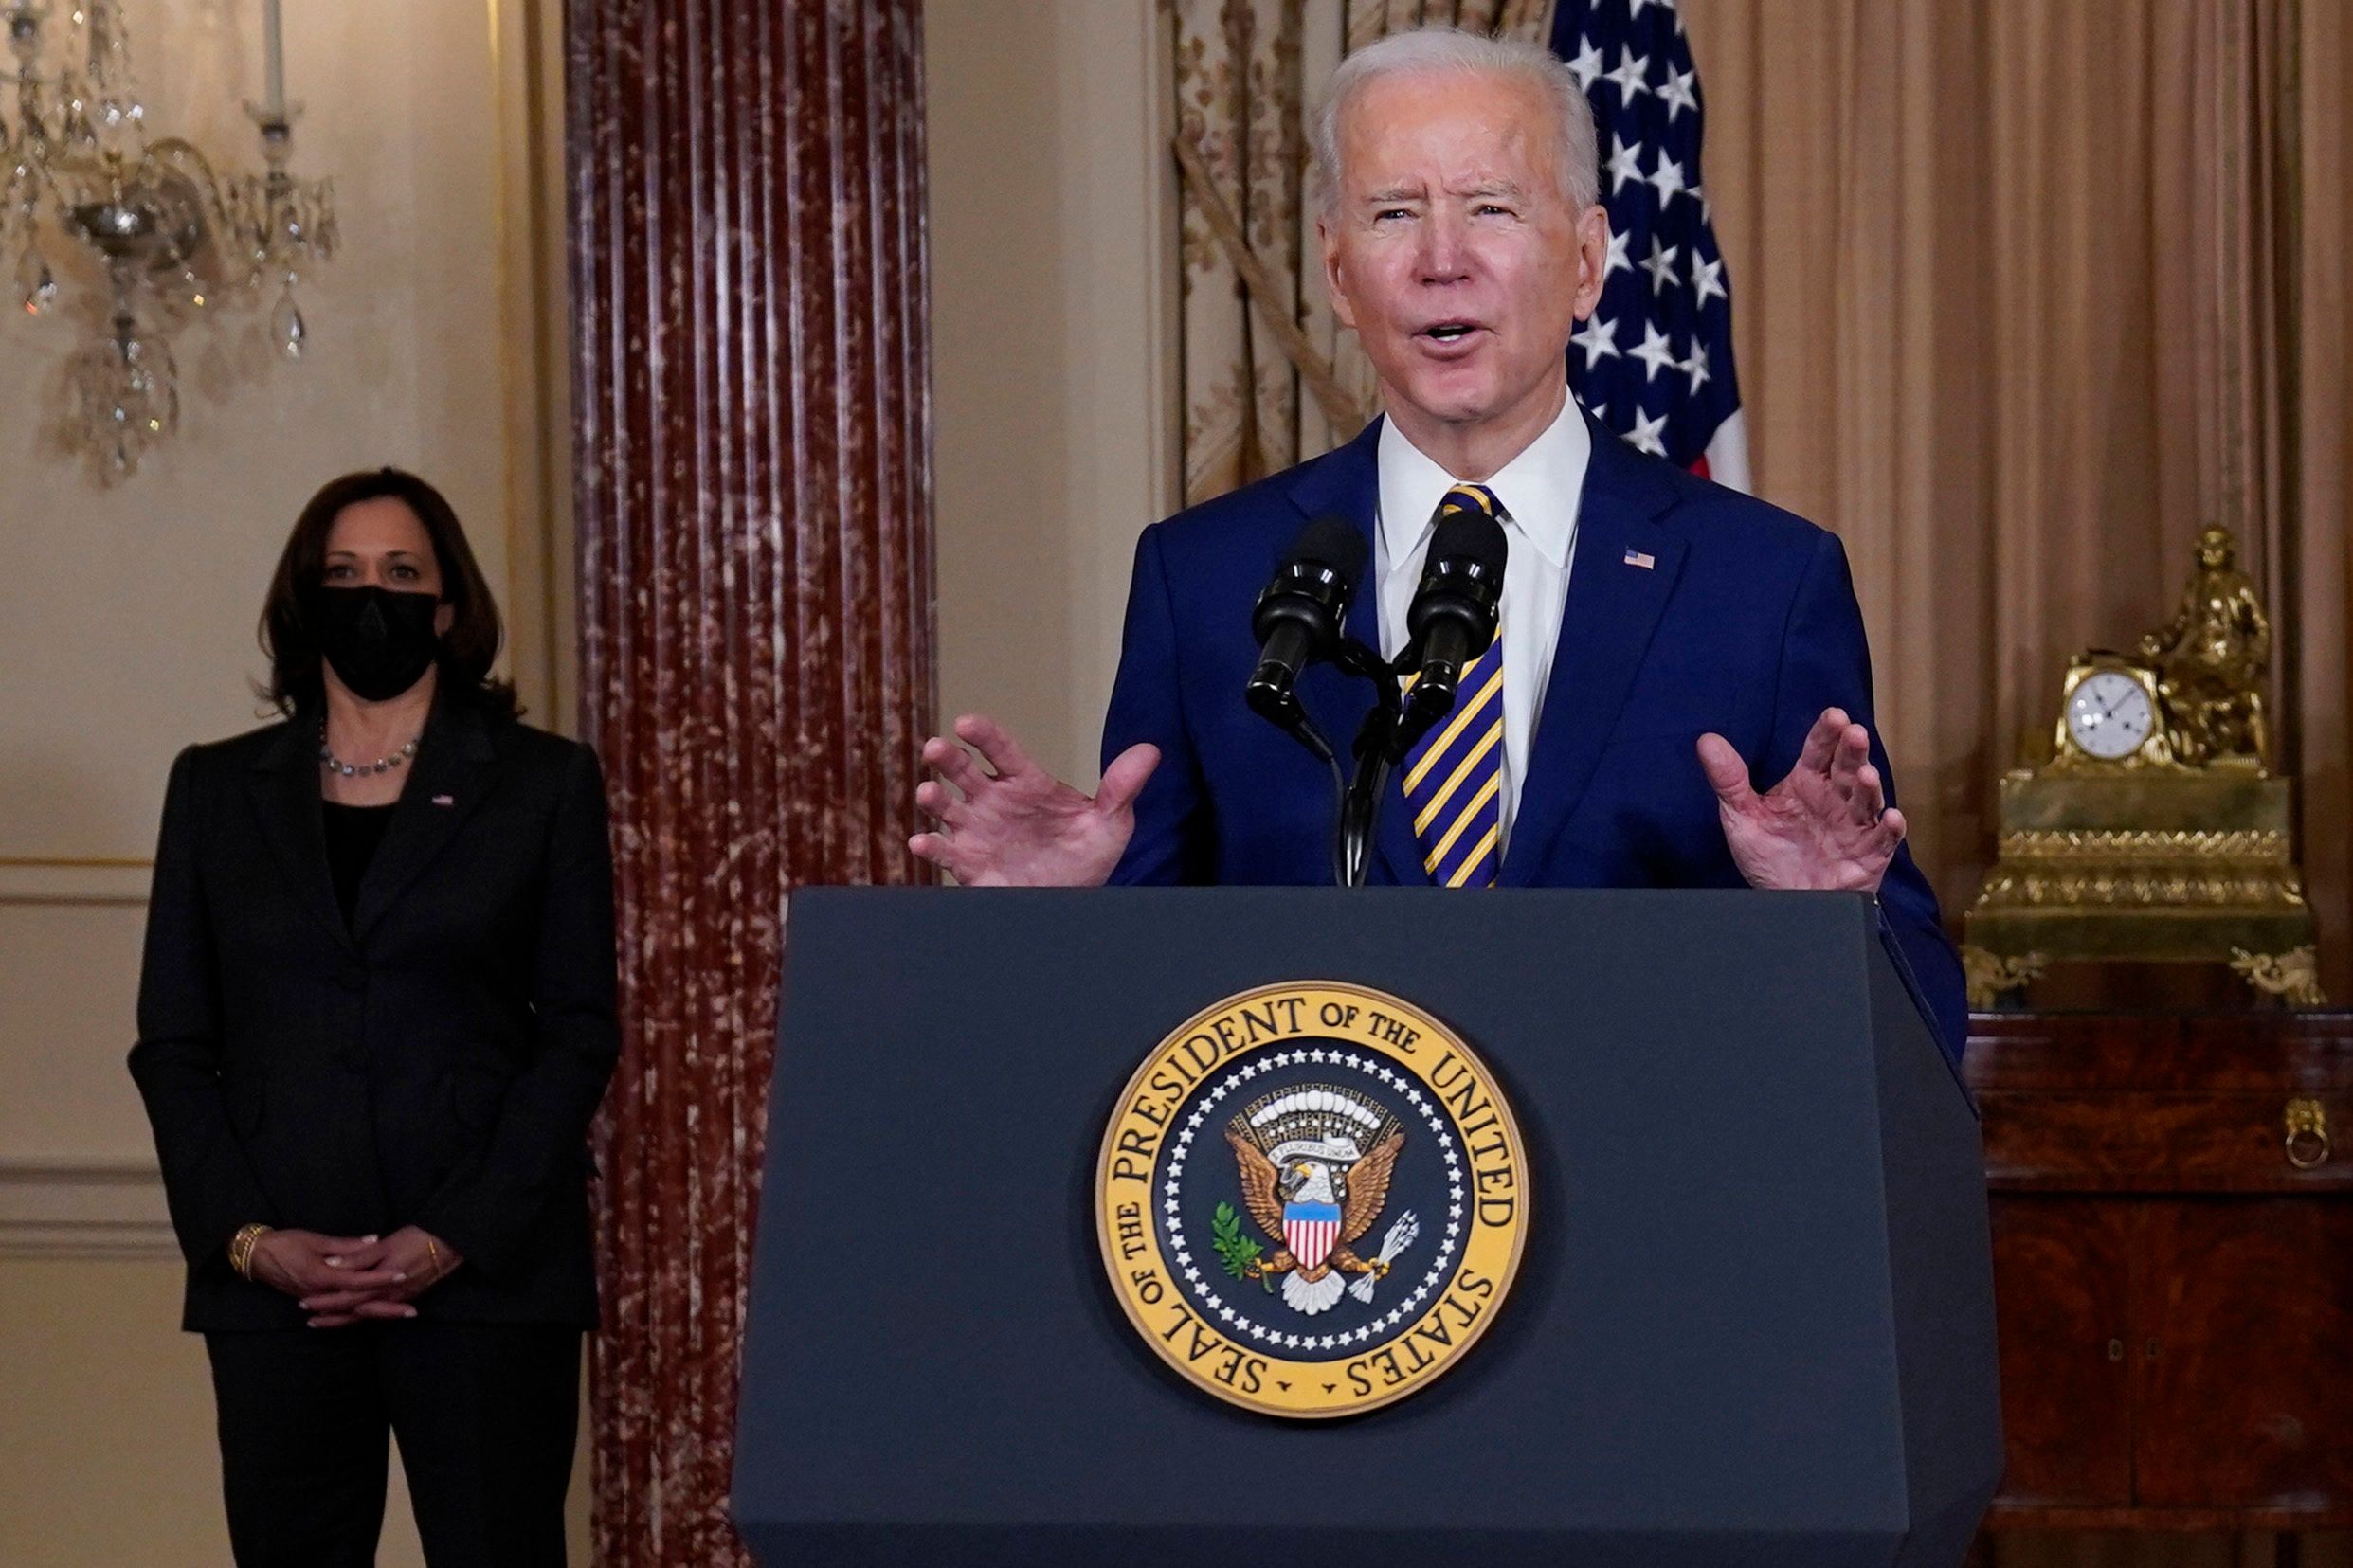 Joe Biden ‘going to act fast’ on COVID relief as Americans near breaking point